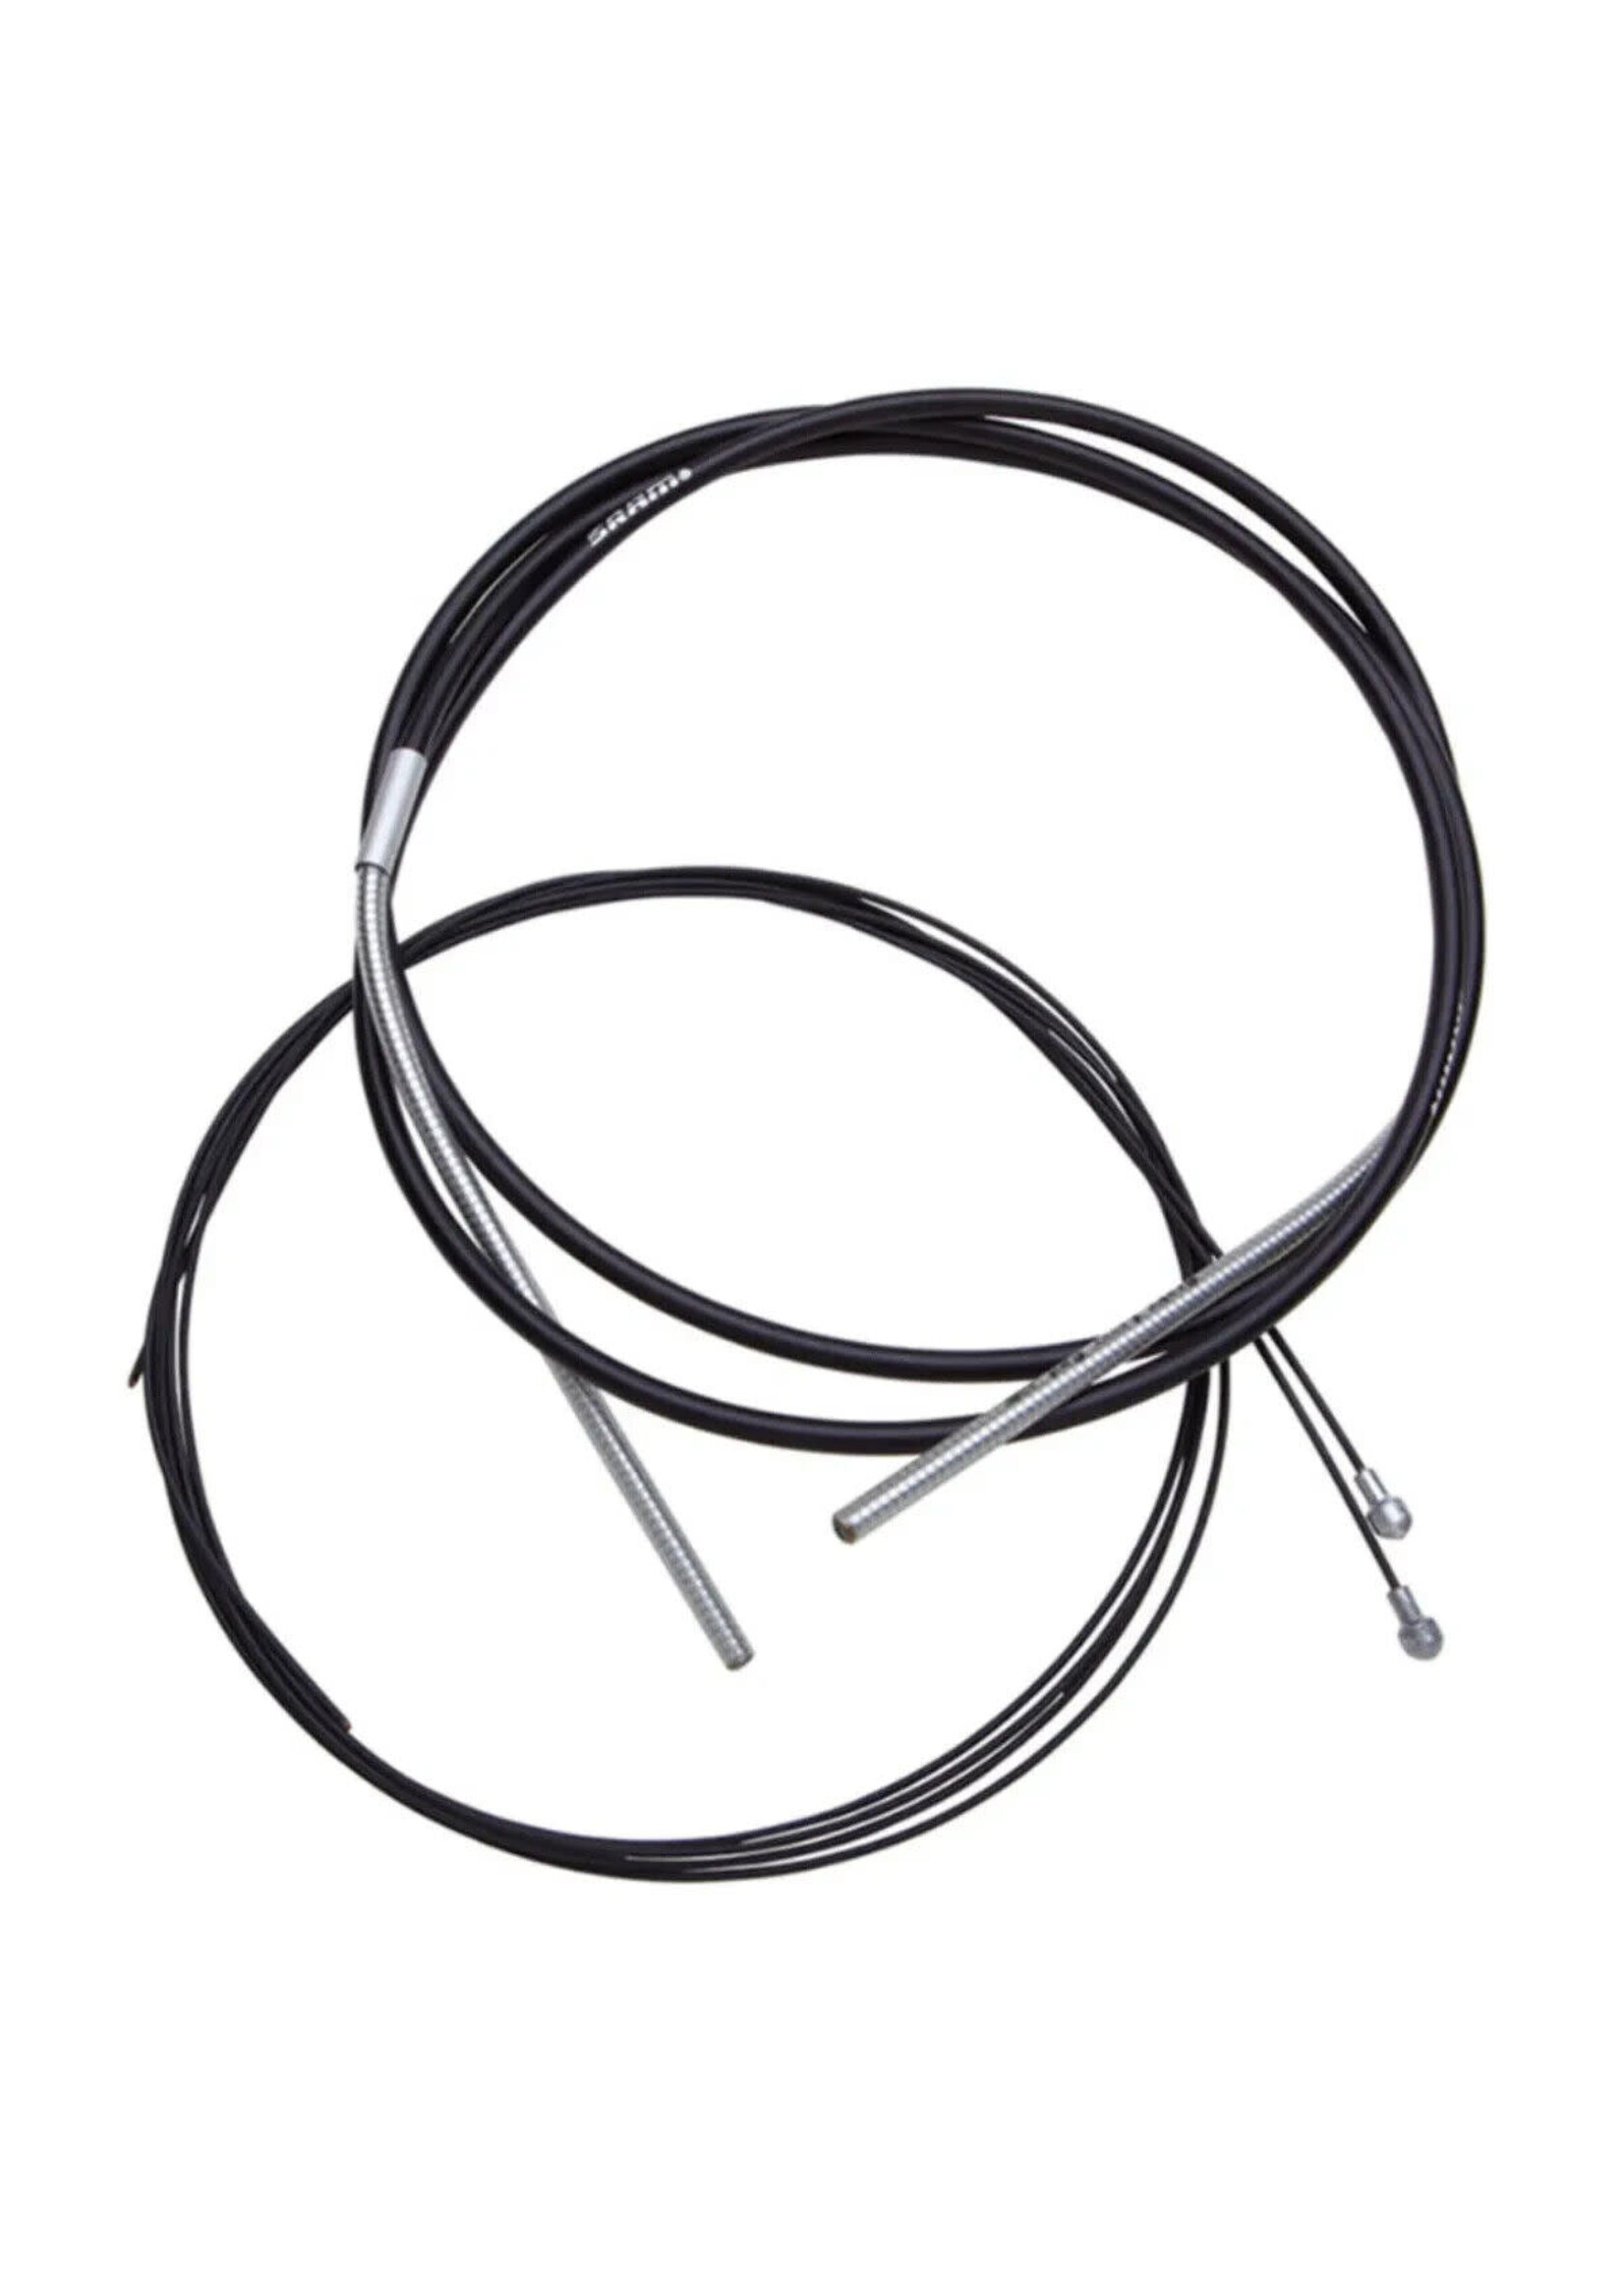 SRAM SRAM SlickWire XL Road Brake Cable Kit Black 5mm (1.6mm coated cable, 5mm Kevlar reinforced compression-free housing, ferrules, end caps, frame protectors)